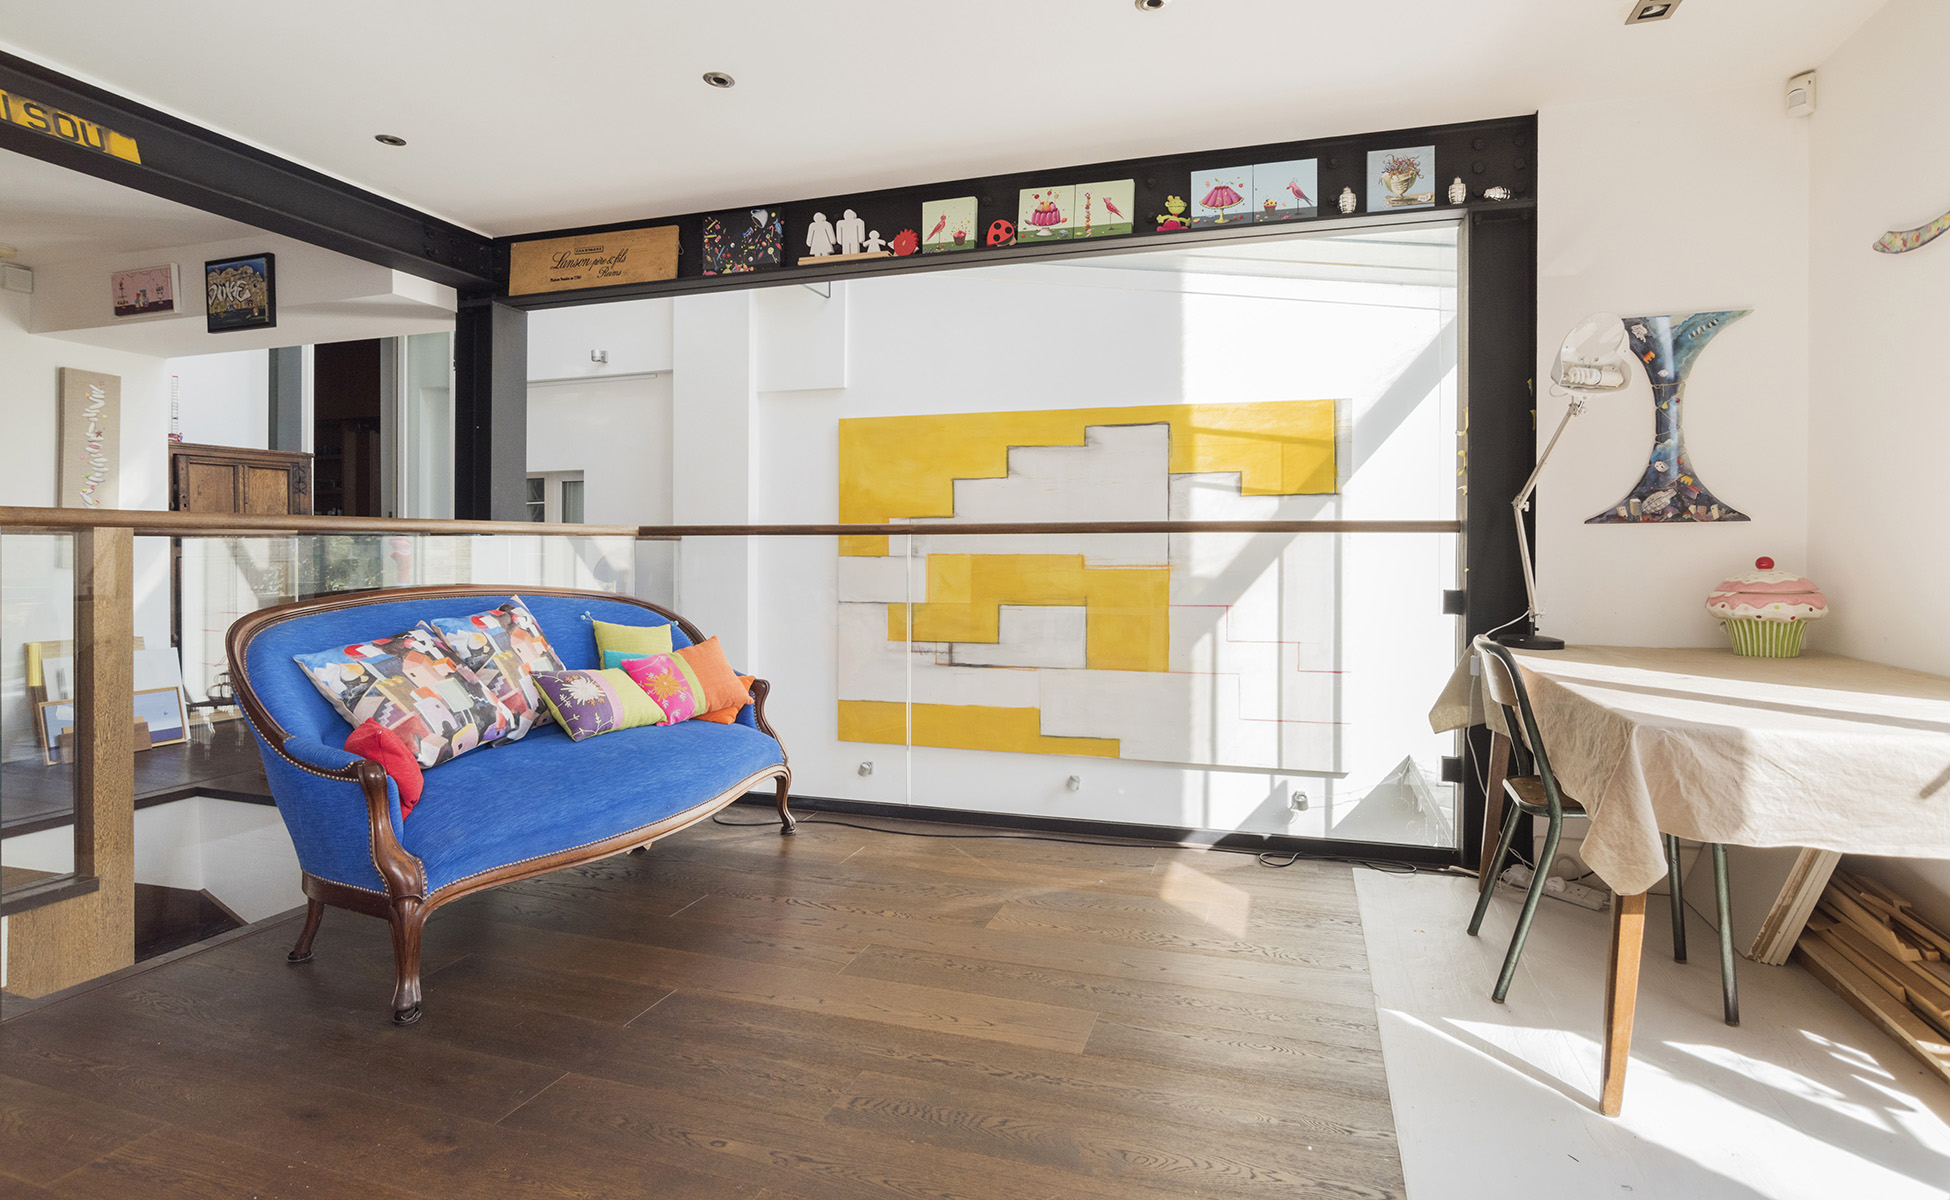 <p>Lovelydays Luxury Rentals introduce you pictures of a charming house in the heart of Notting Hill</p>